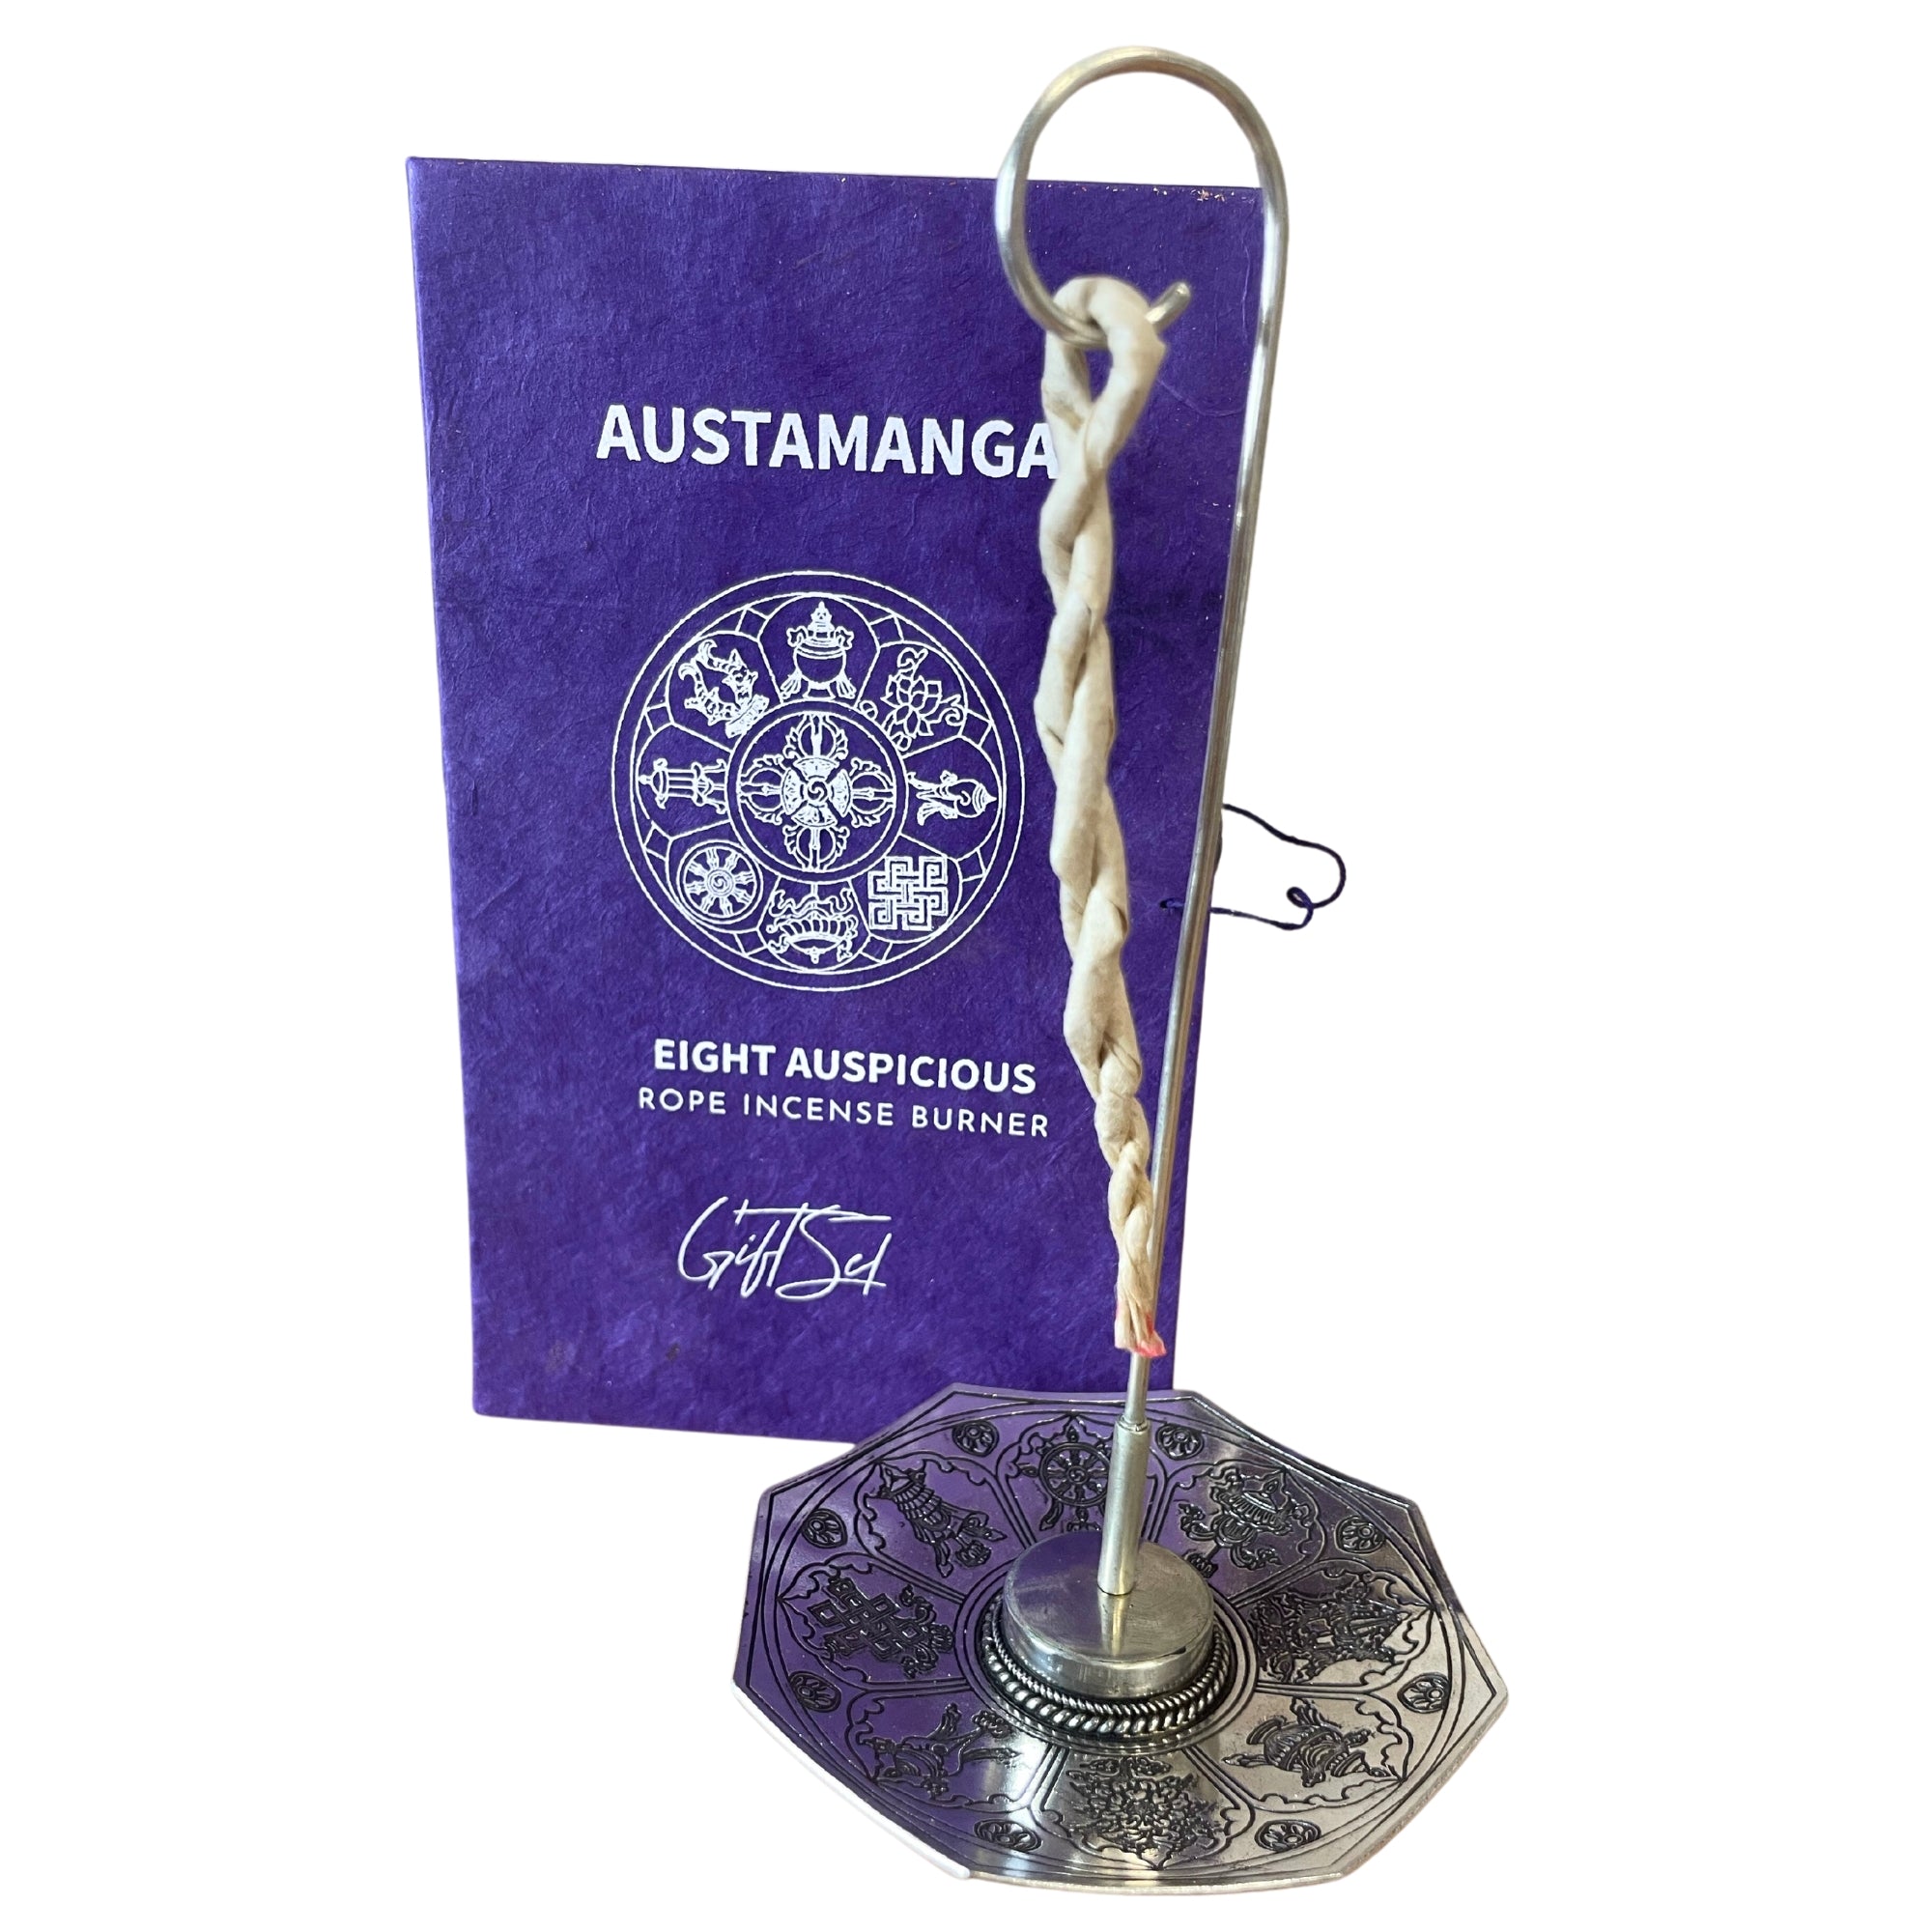 View Rope Incense and Silver Plated Holder Set Astamangal information